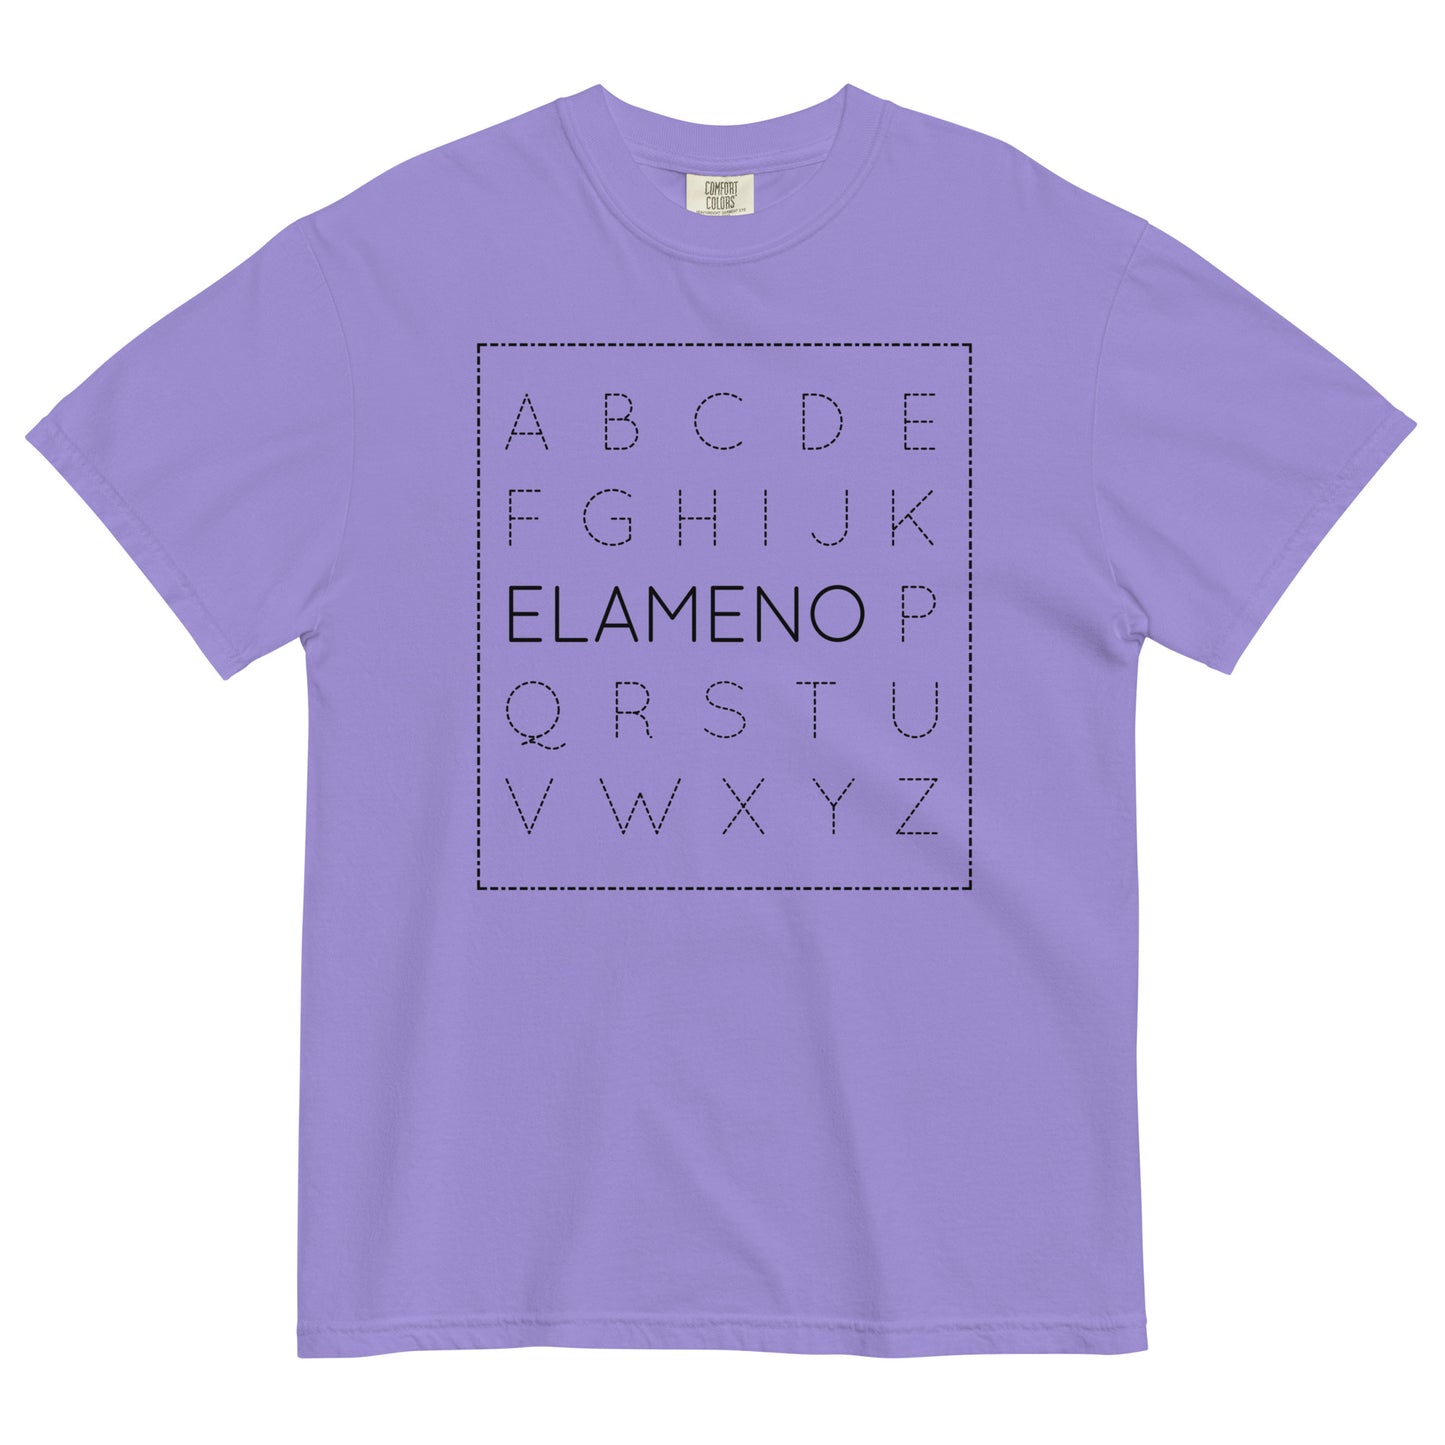 Elameno Men's Relaxed Fit Tee